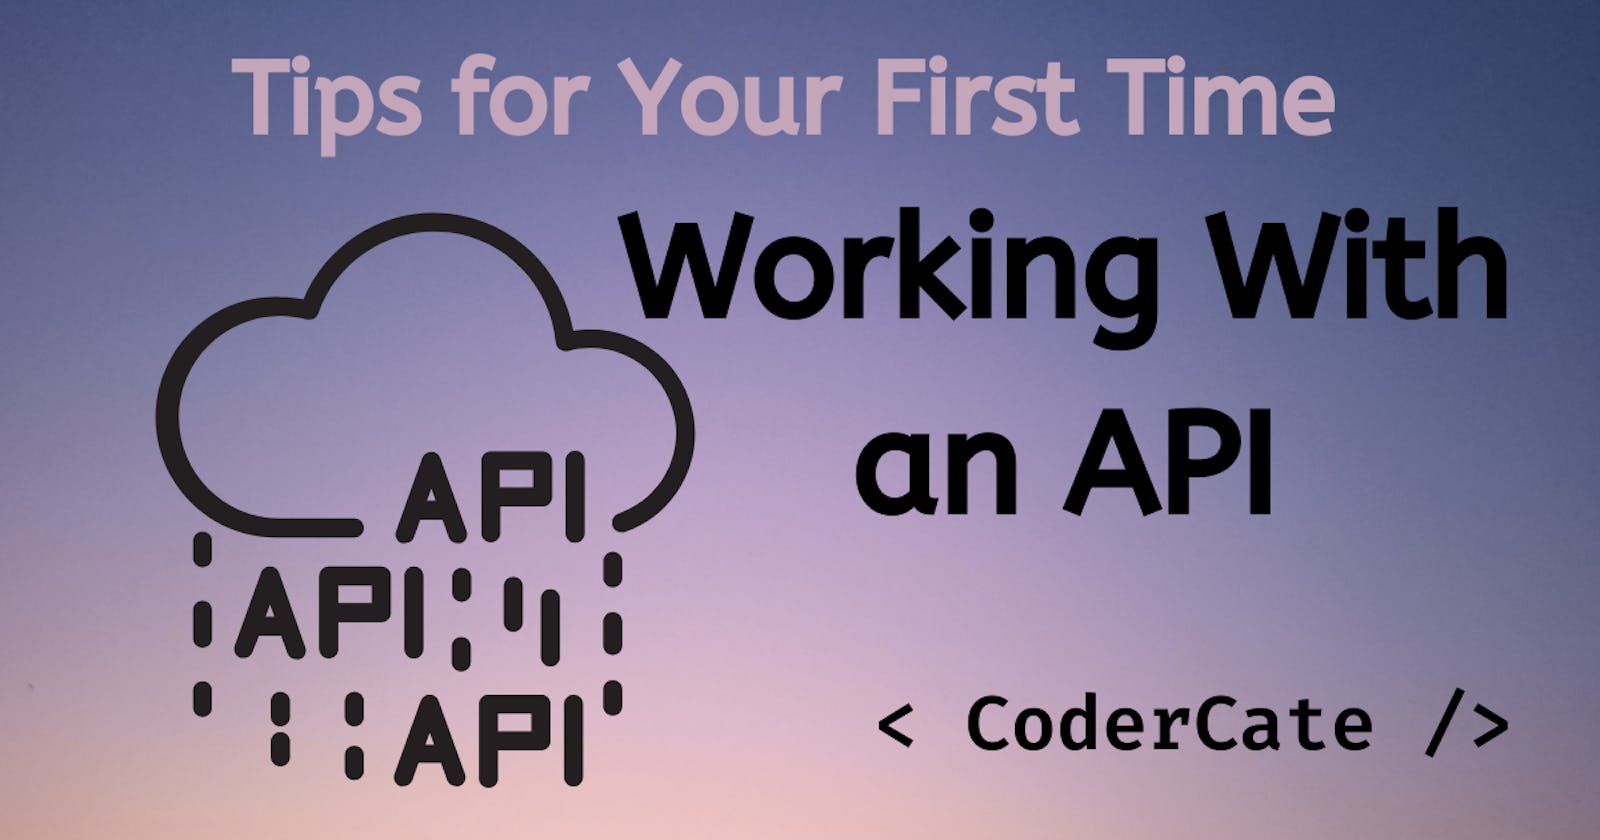 Tips for Your First Time Working With an API